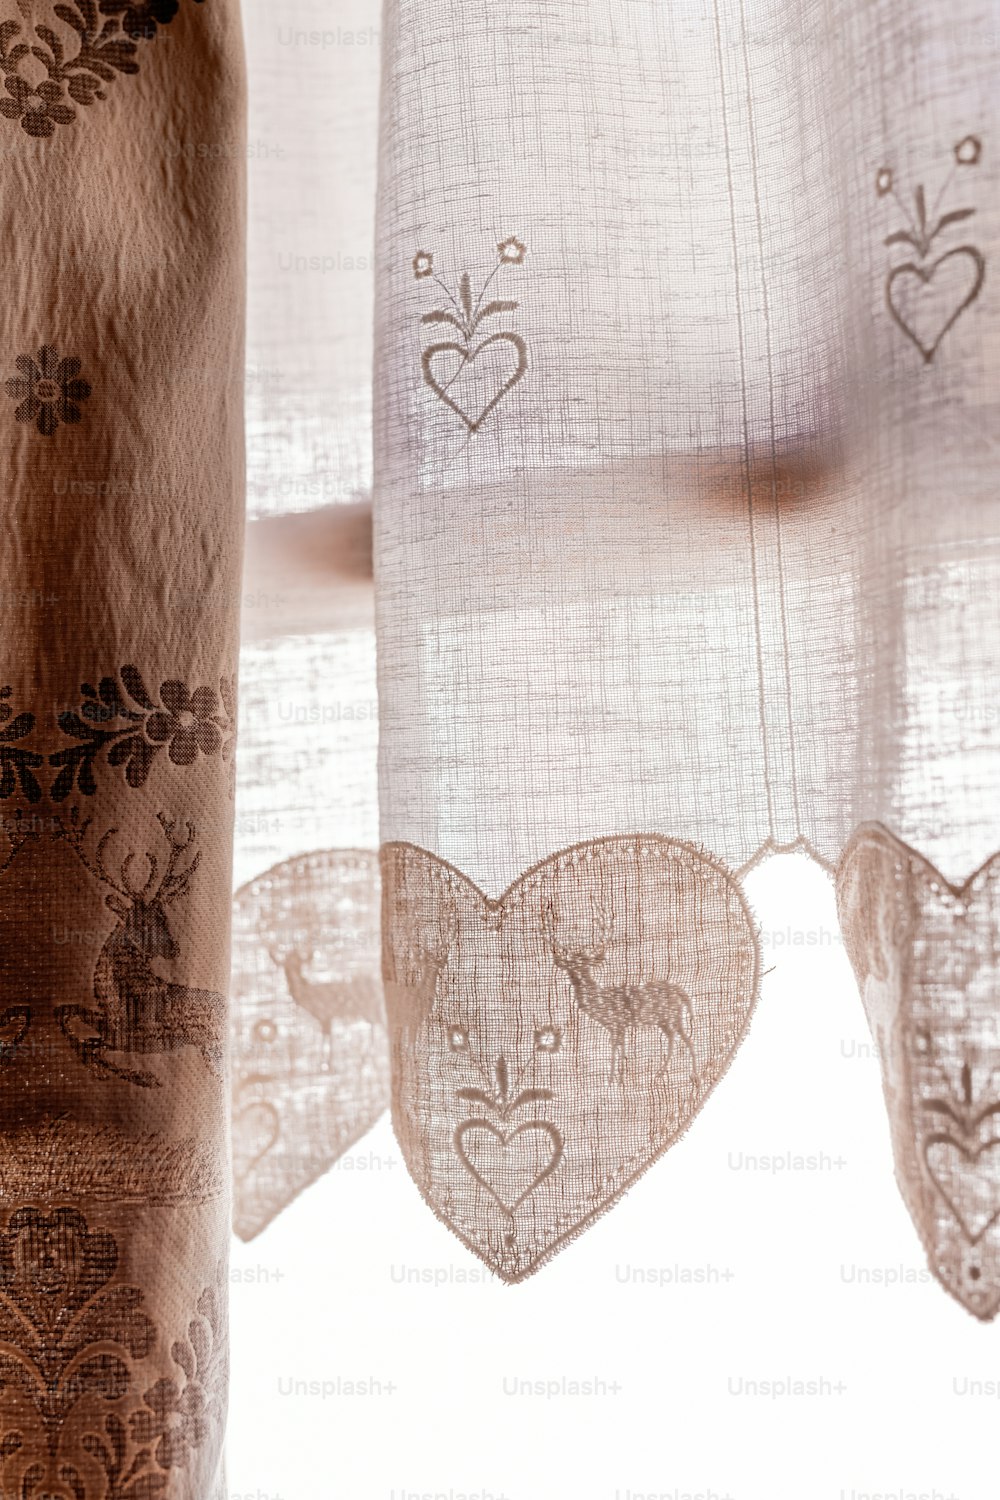 a curtain with a heart drawn on it